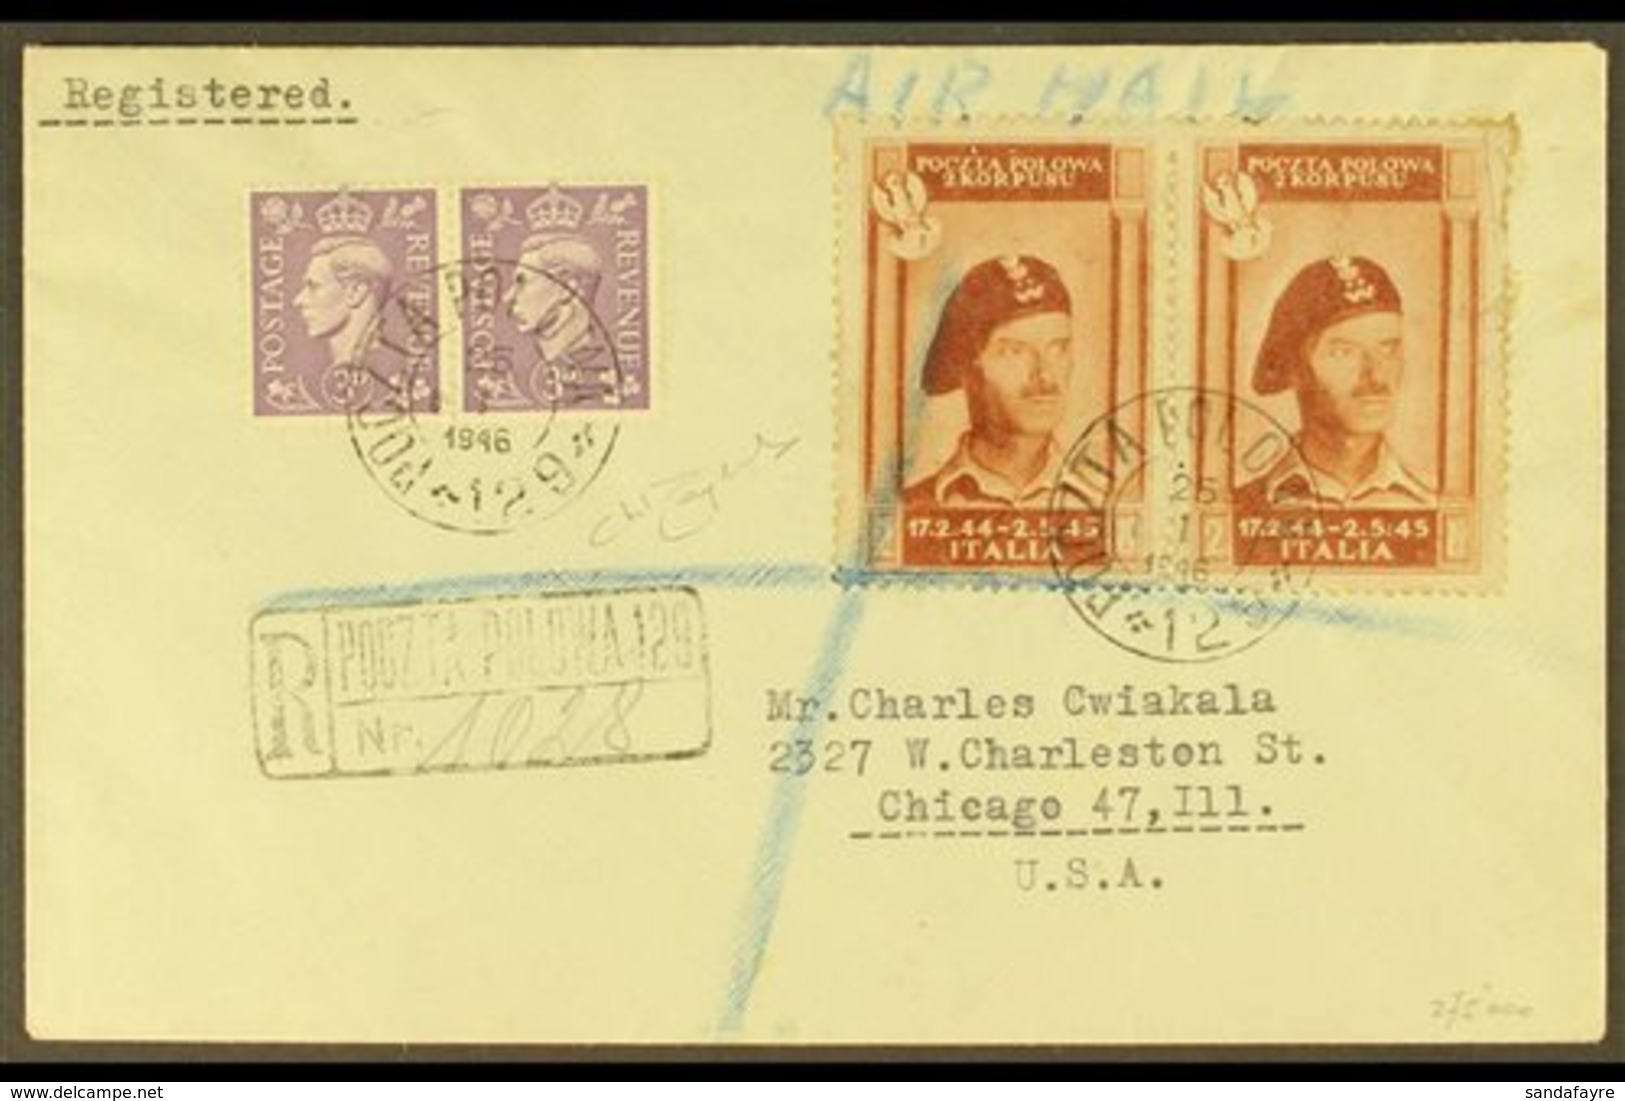 POLISH CORPS 1946 Registered Cover To Chicago Franked GB 3d Lilac Plus Polish Corps 2z Red Brown Pair, Sass 4, With Pozt - Non Classificati